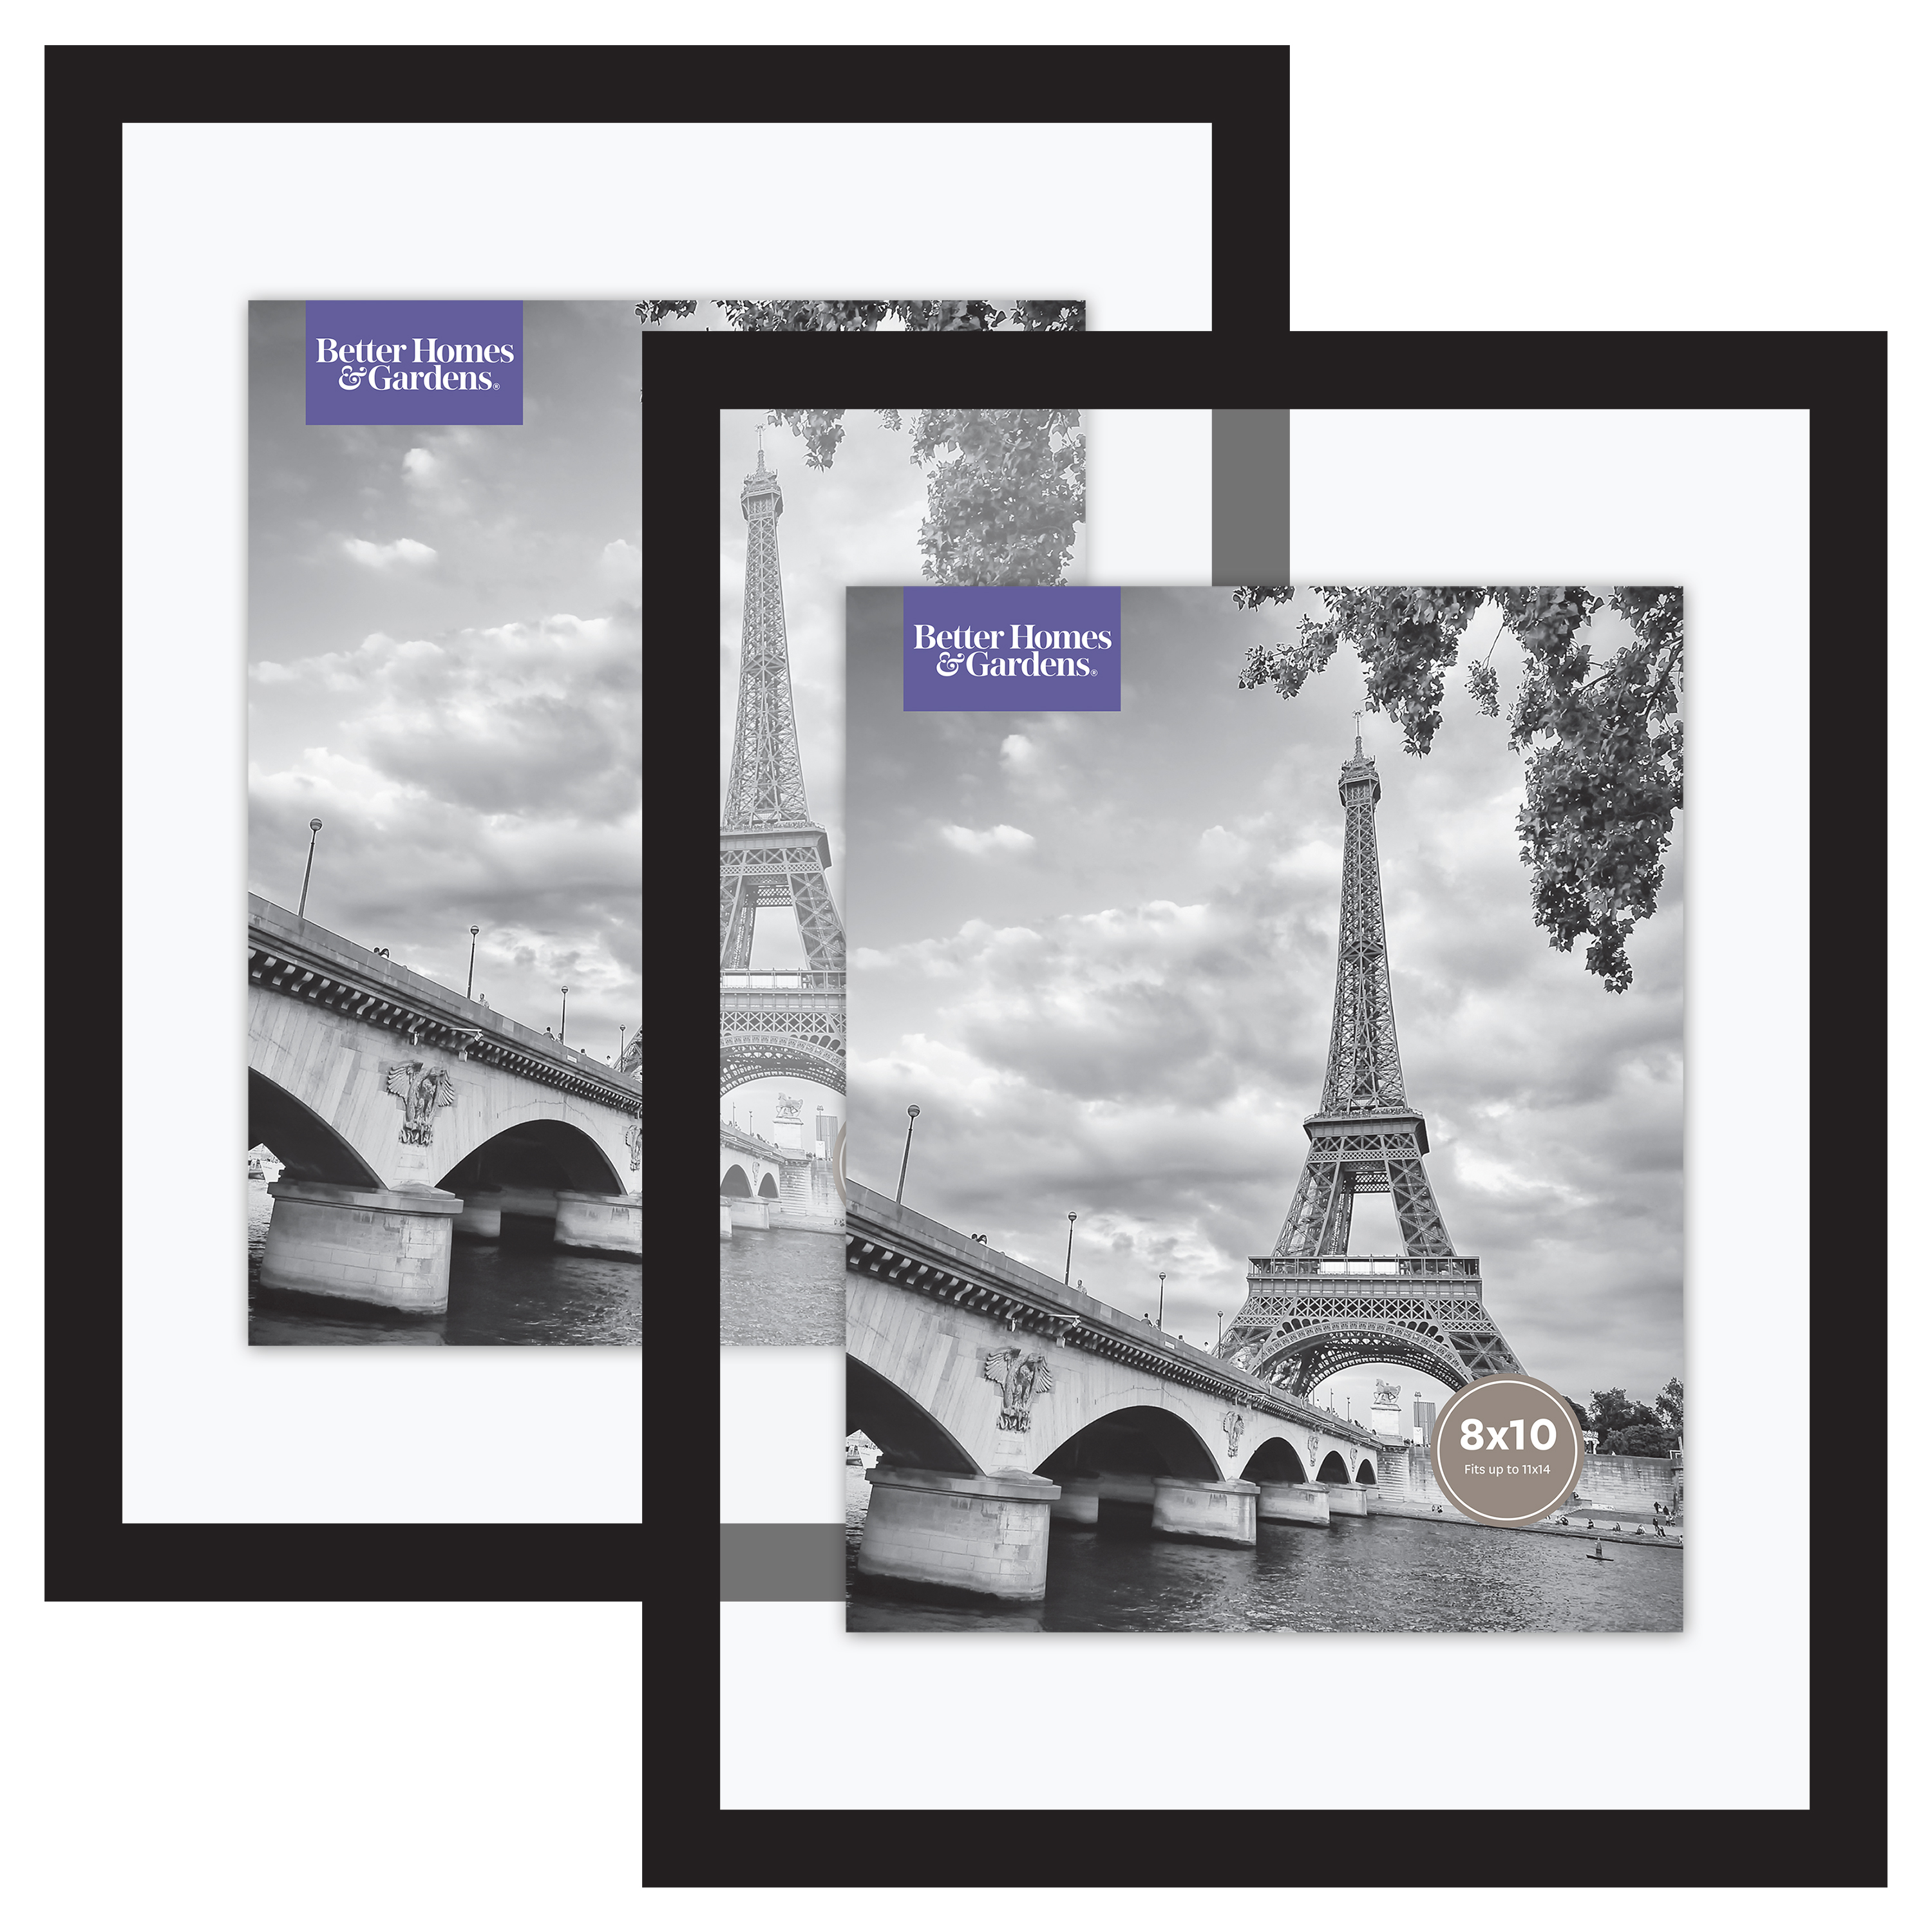 Better Homes & Gardens 11x14 Inch Float Picture Frame, Black, Set of 2 - image 1 of 2